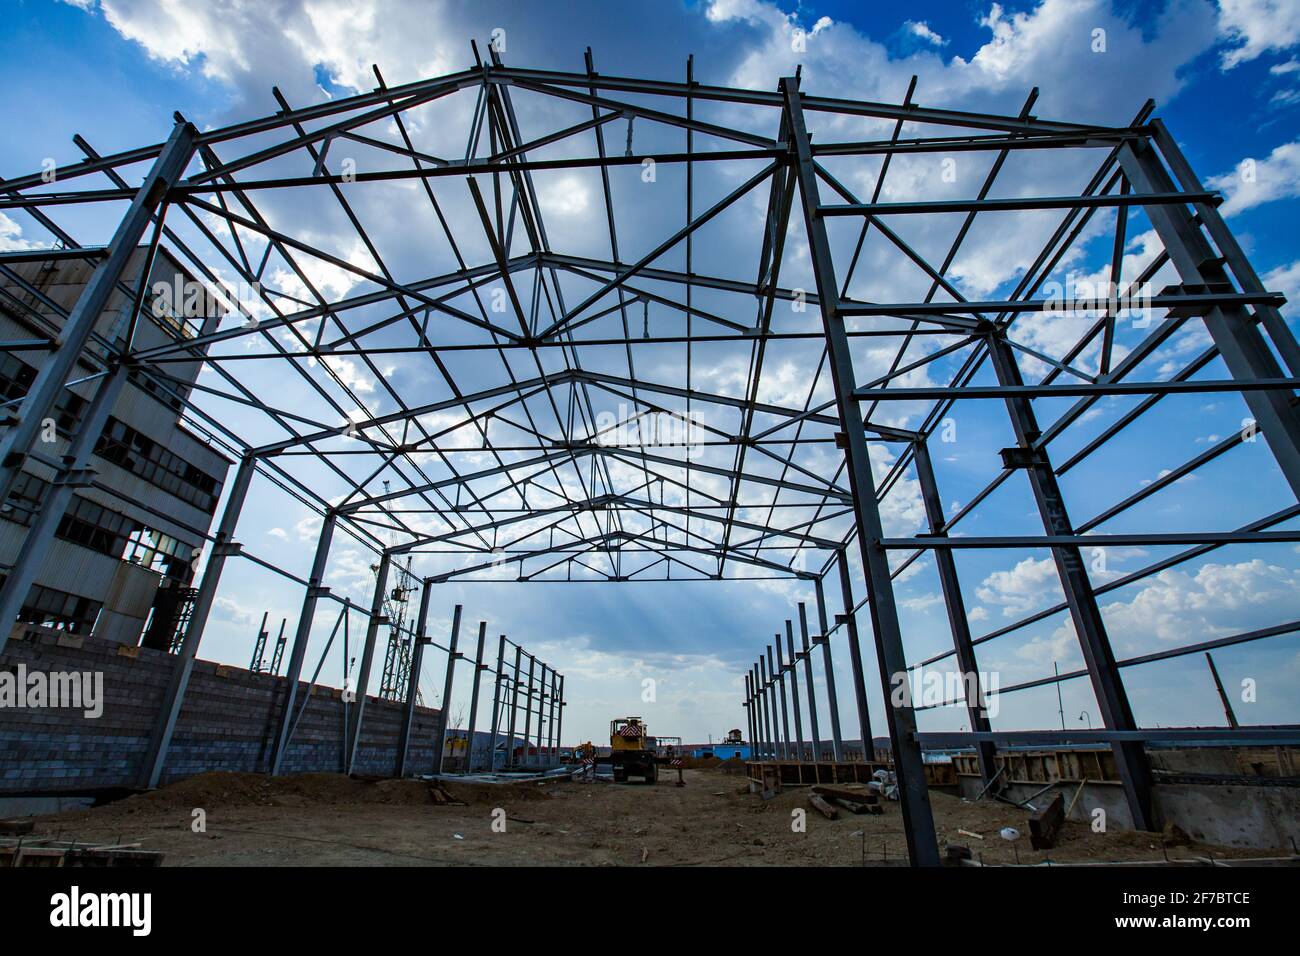 Construction of new industrial building. Assembling steel building structure. Blue sky, clouds. Stock Photo